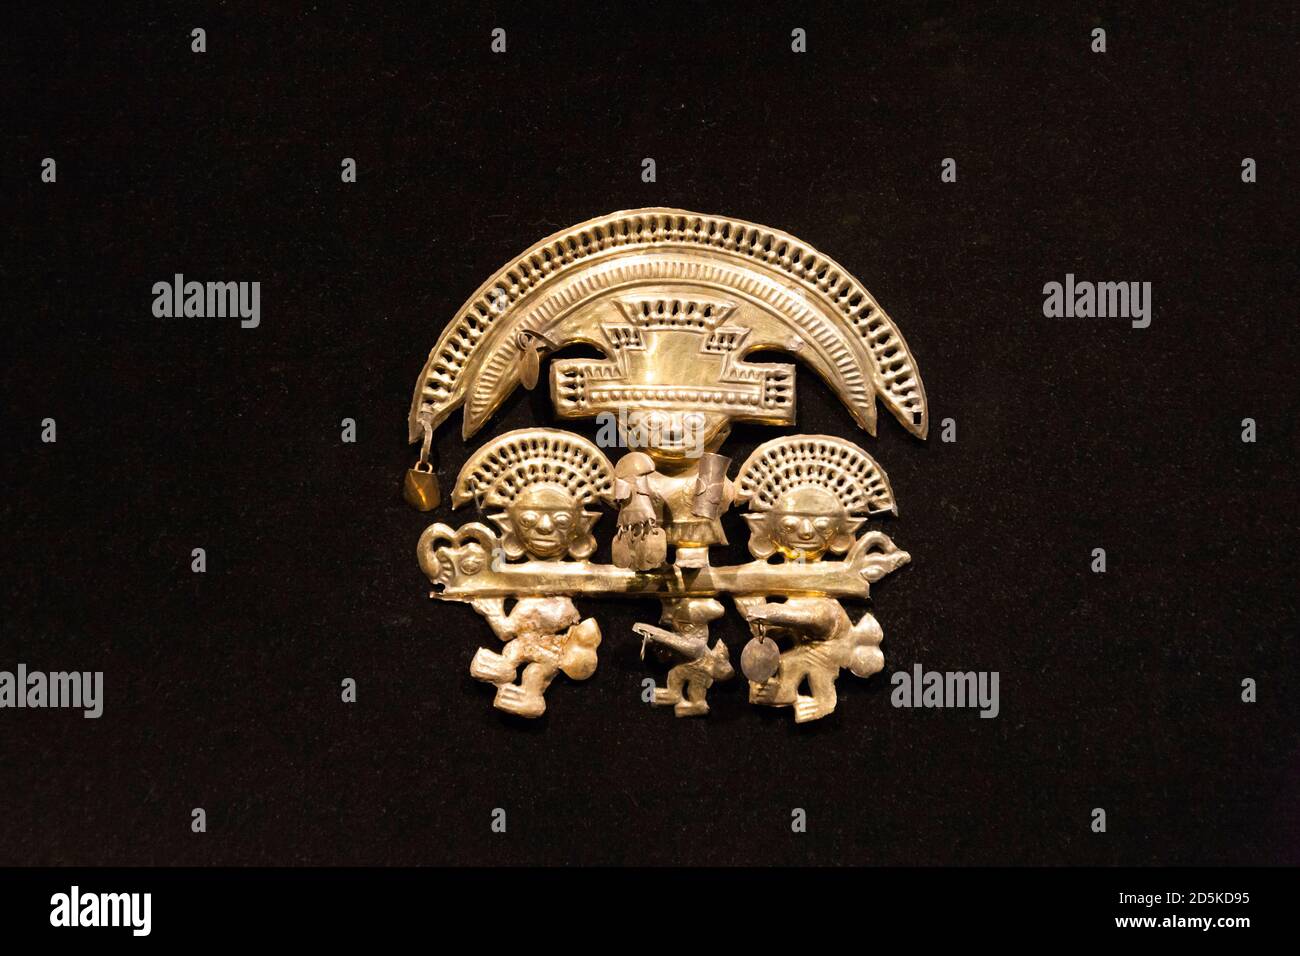 Gold earring of chimu culture, The metalware gallery, 'National Museum of Archaeology, Anthropology and History of Peru', Lima, Peru, South America Stock Photo